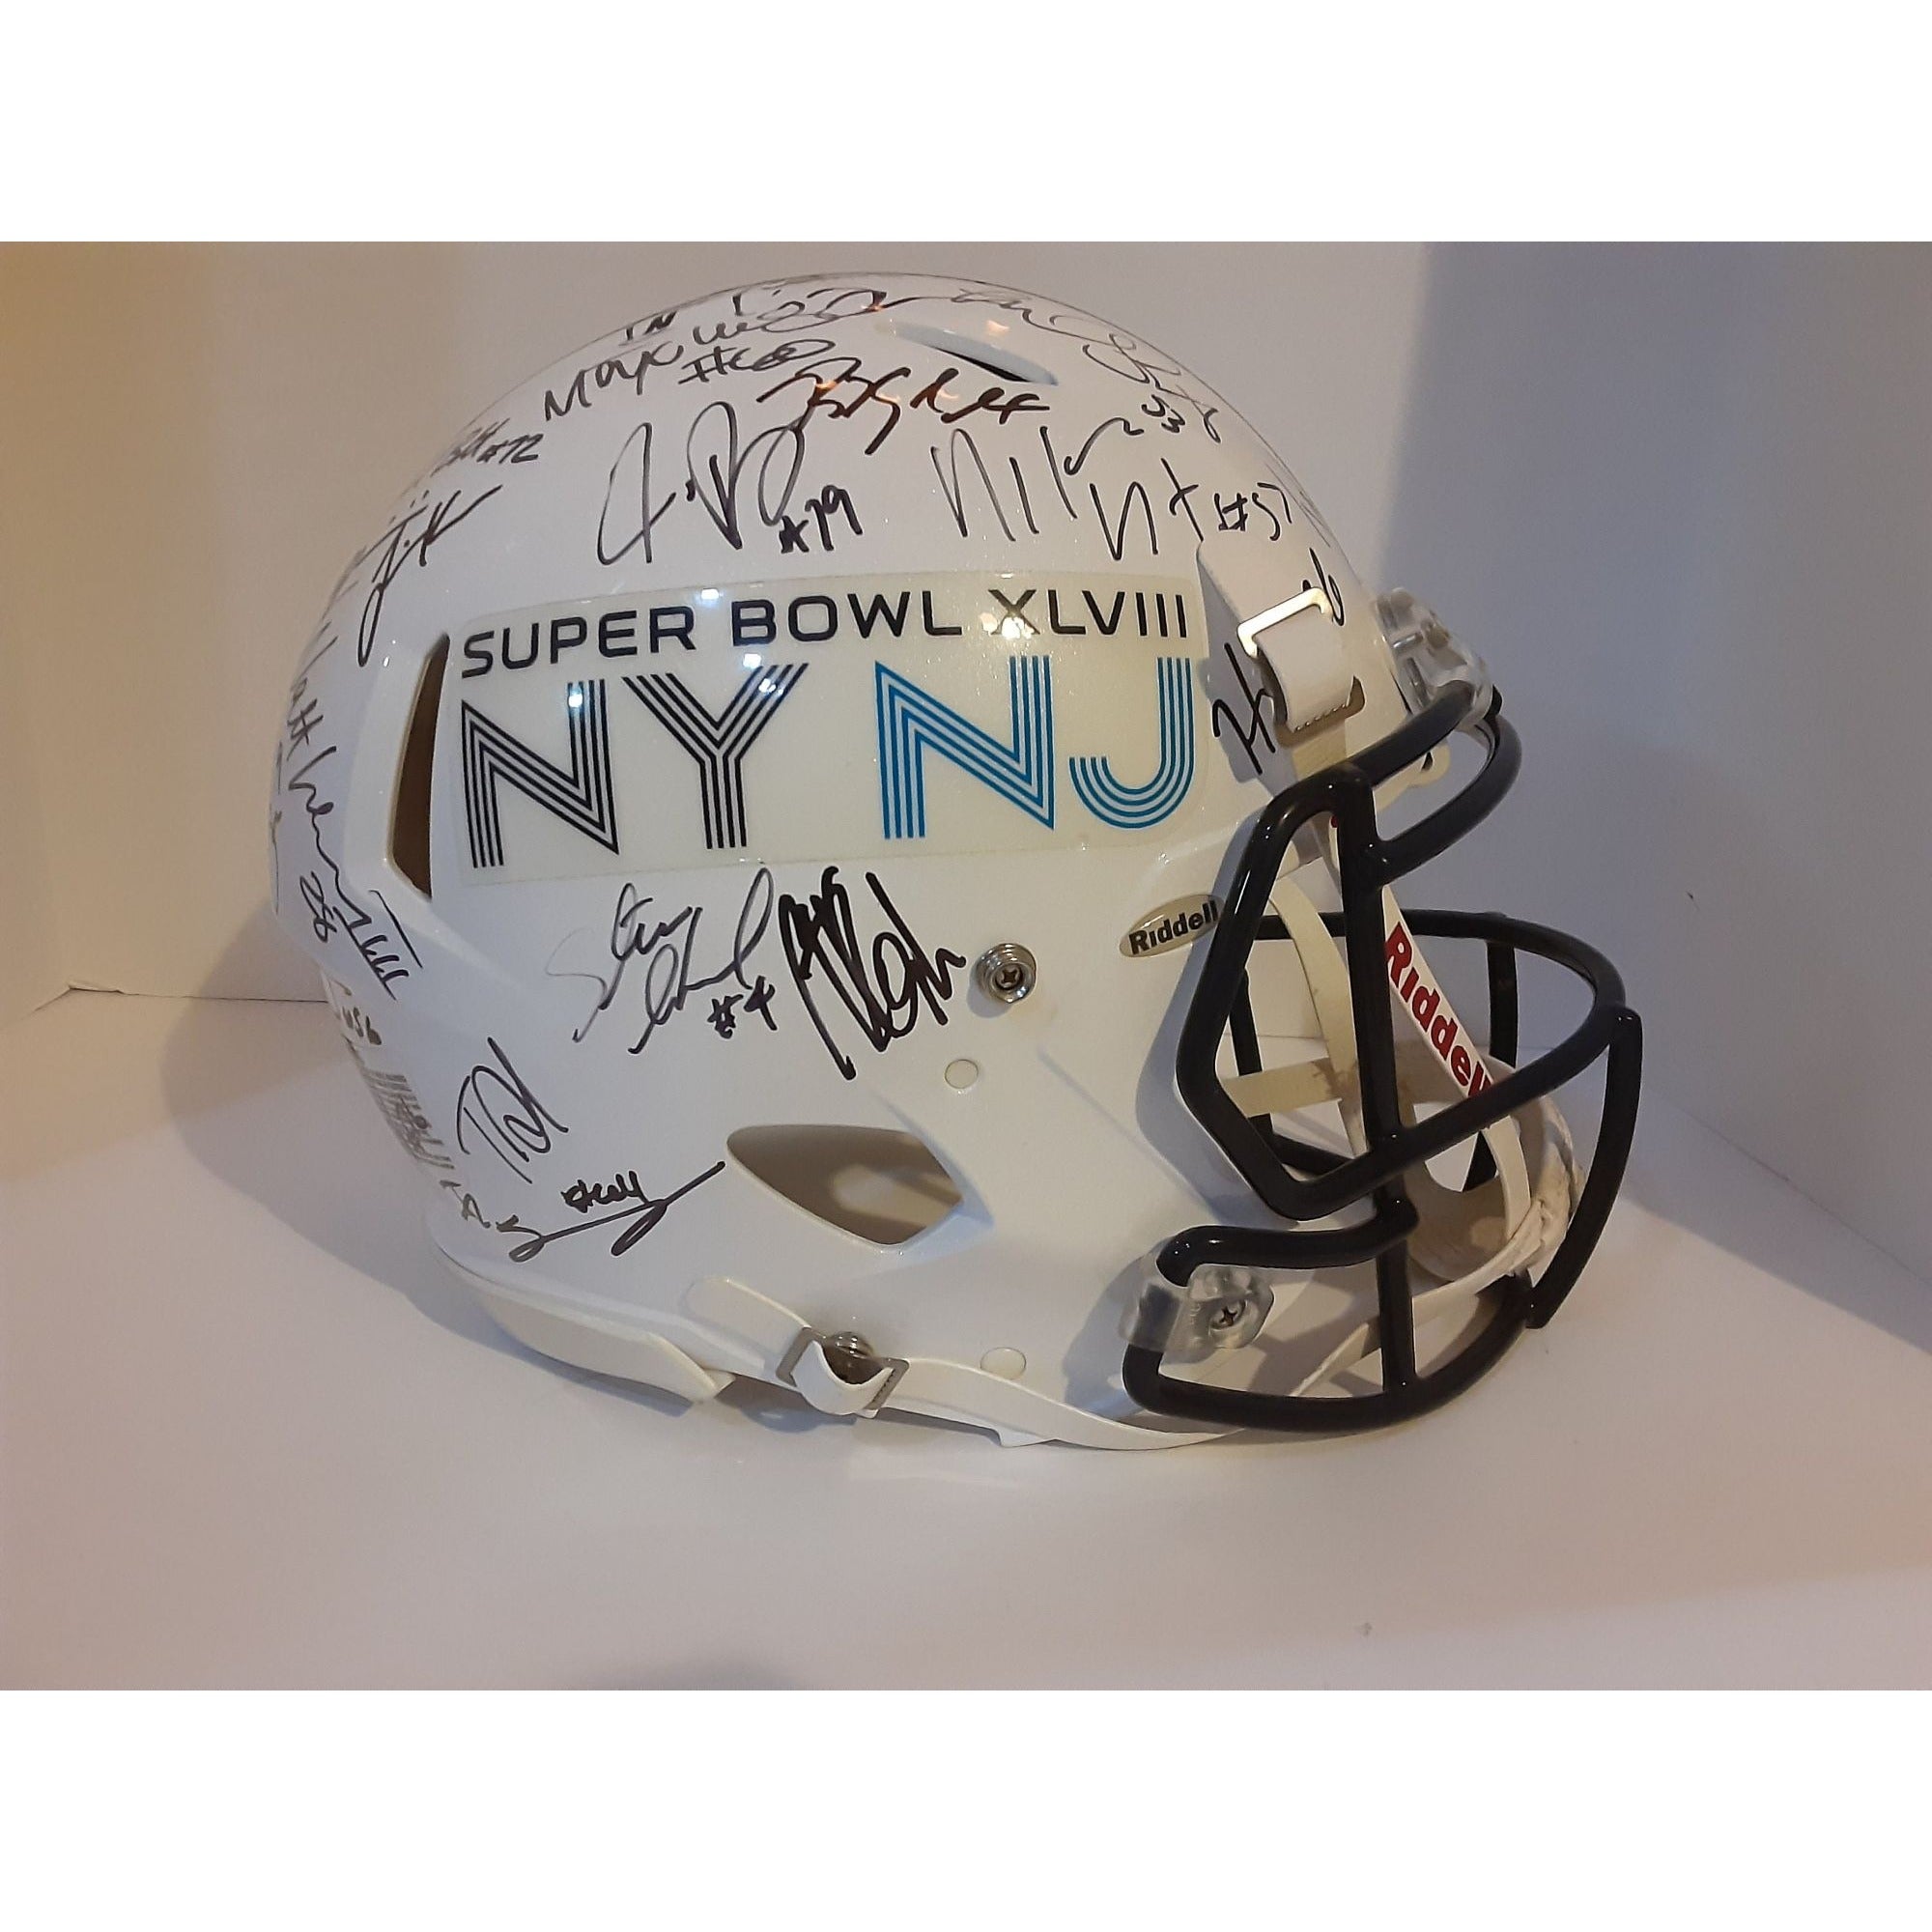 Russell Wilson, Marshawn Lynch, Richard Sherman, Super Bowl Champs Pro Model Team signed helmet with proof